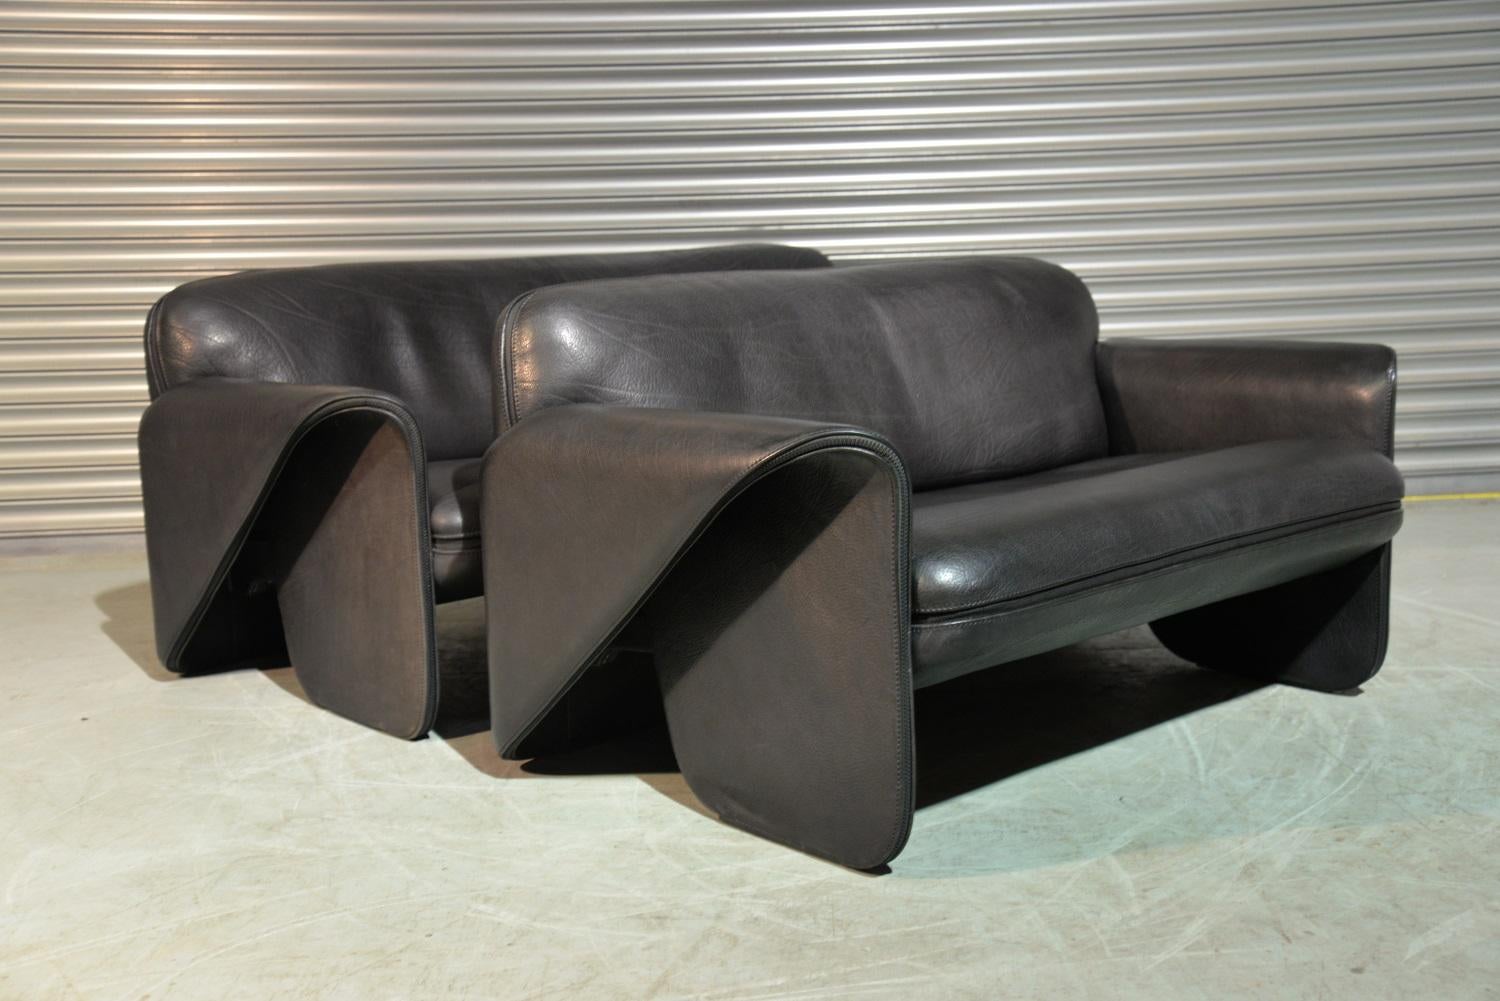 Discounted airfreight for our US and international customers (from 2 weeks door to door)

We are delighted to bring to you an ultra rare pair of vintage De Sede DS 125 sofas designed by Gerd Lange in 1978. These sculptural pieces are upholstered in